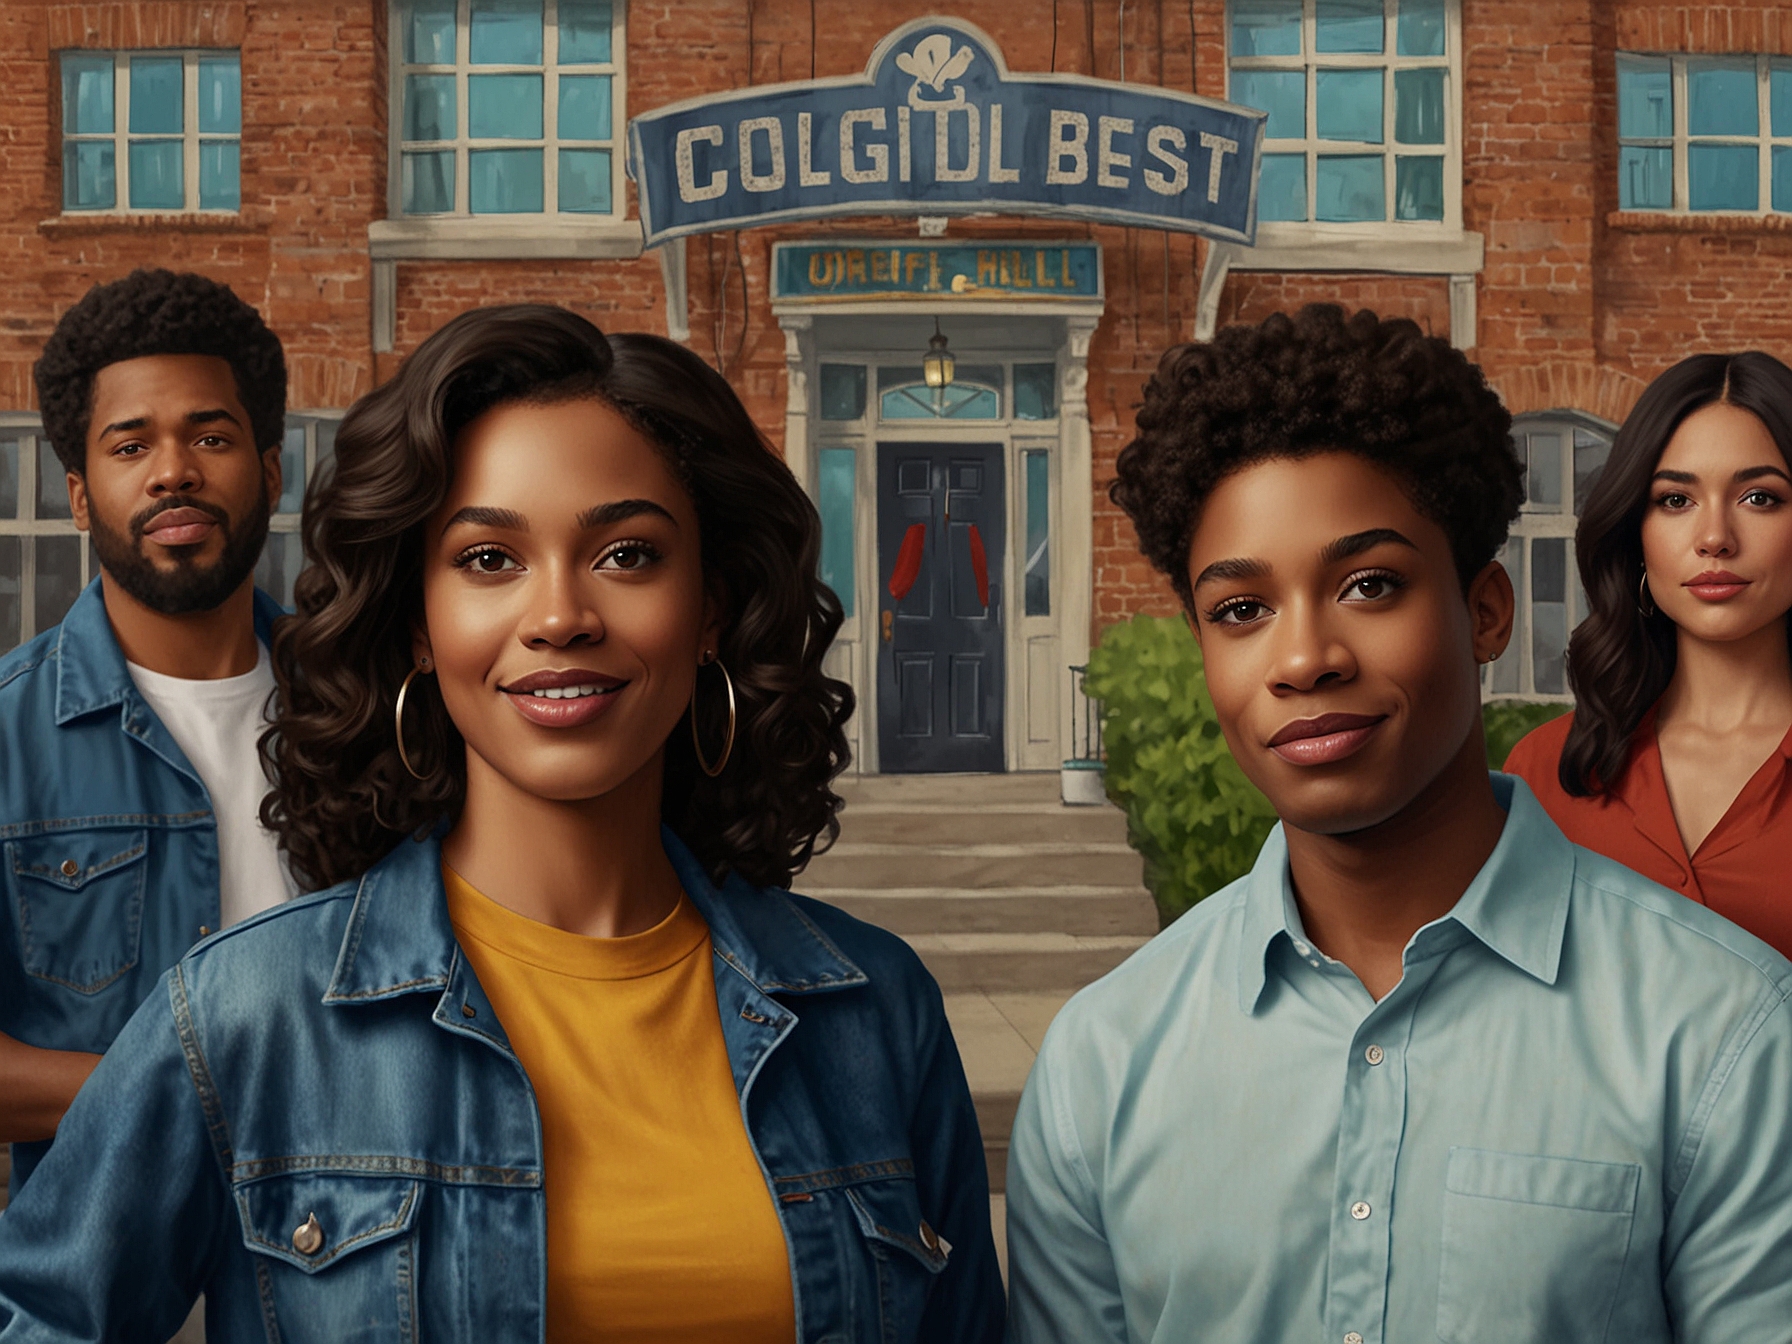 Streaming platforms like Hulu, Amazon Prime, and BET Plus offer free trials for viewers to watch College Hill: Celebrity Edition online without immediate cost. Just remember to cancel before the trial ends.